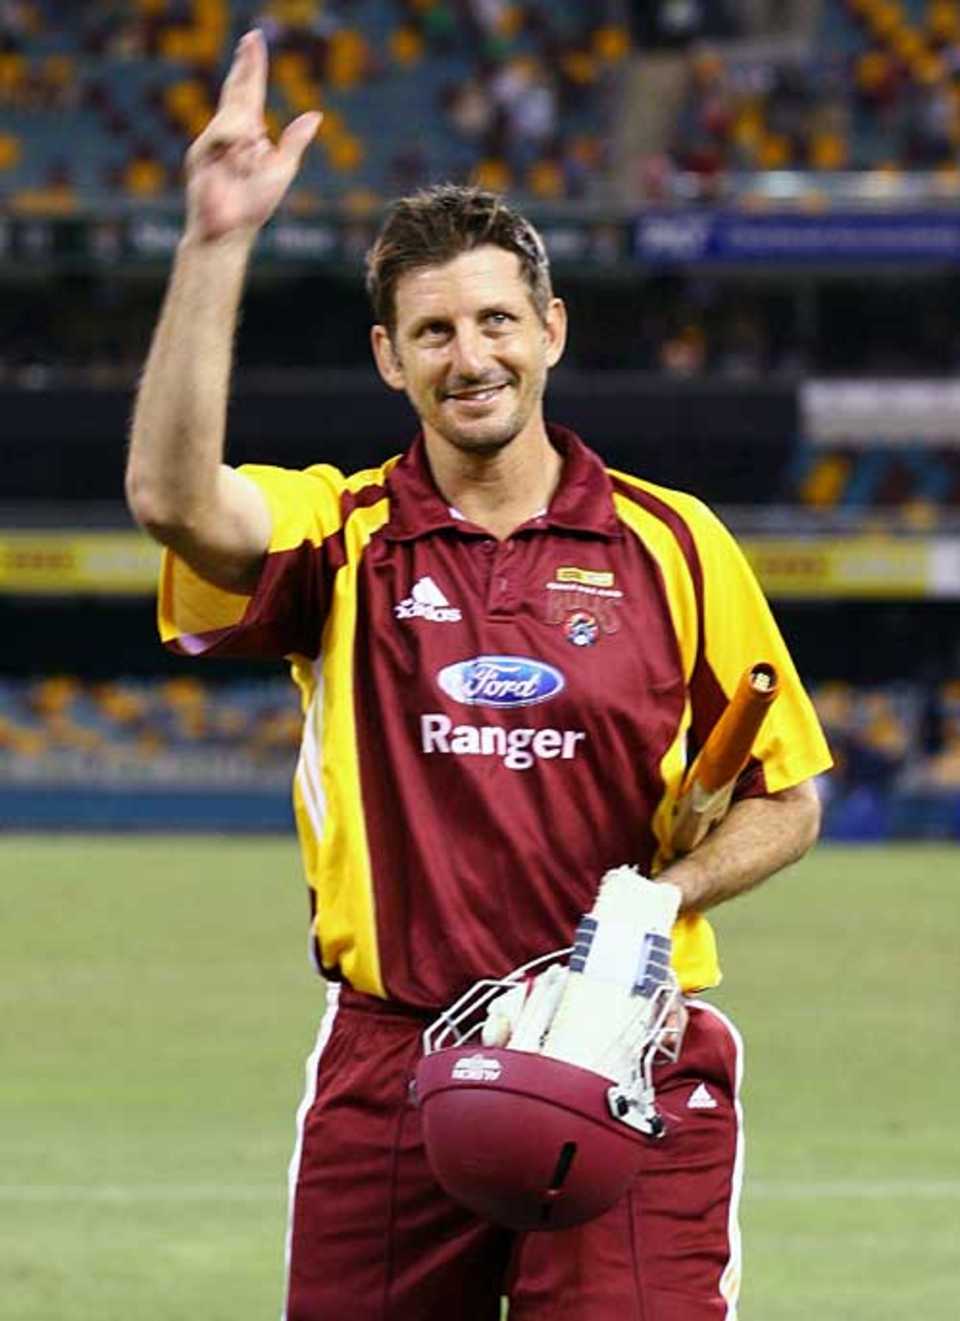 Michael Kasprowicz waves goodbye after his final innings